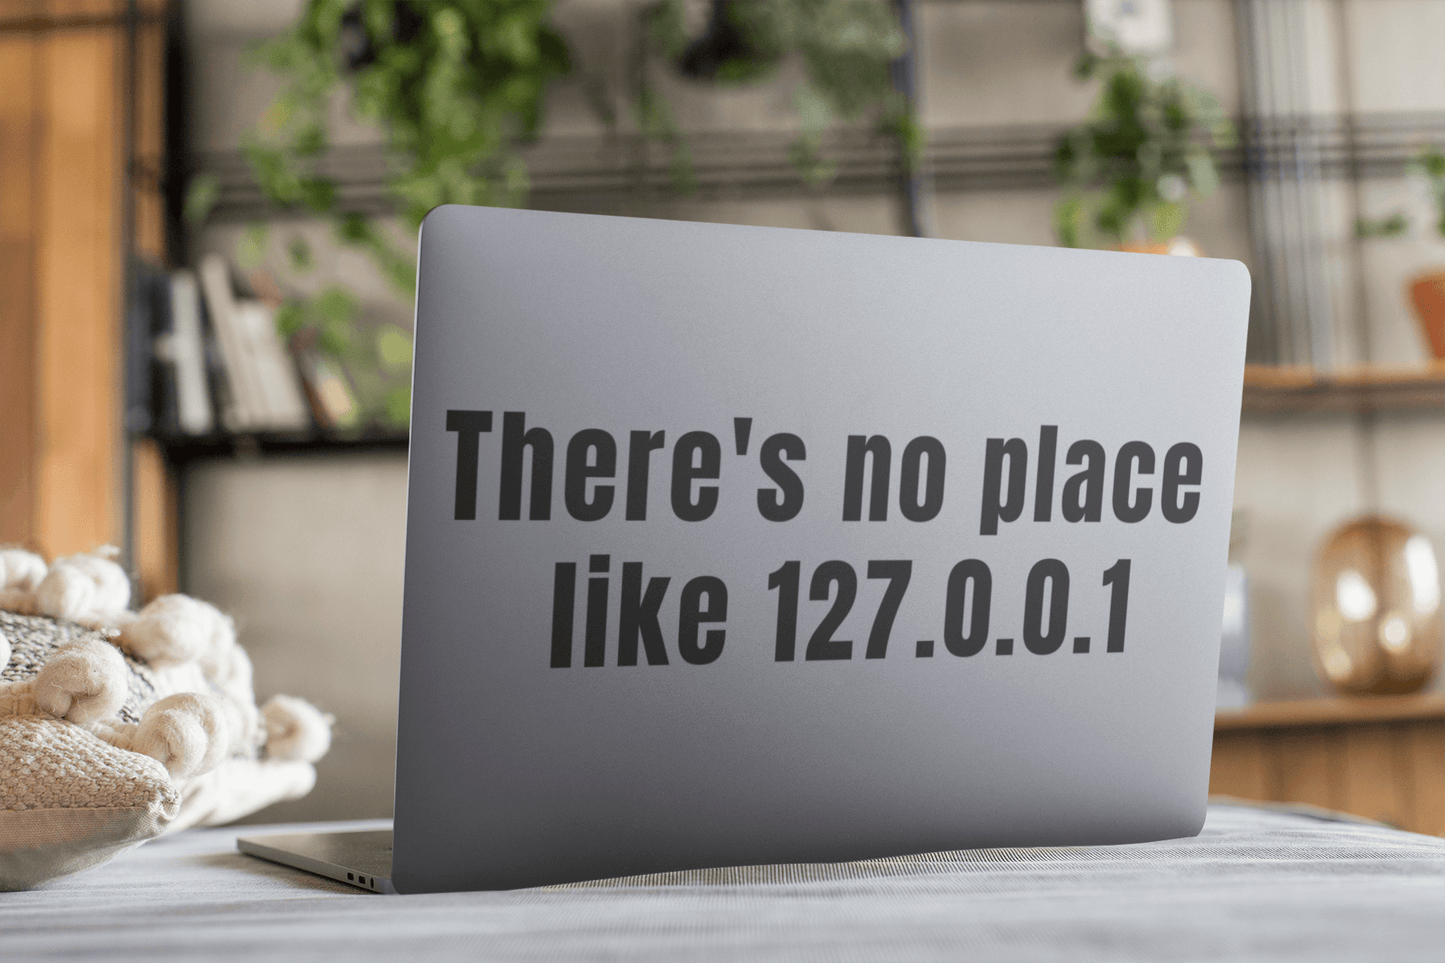 There is no place like 127.0.0.1- Vinyl decal 127.0.0.1 computer computer meme computer sticker Die cut stickers funny sticker Geek IT Localhost meme sticker Programmer sticker stickers vinyl sticker water proof sticker